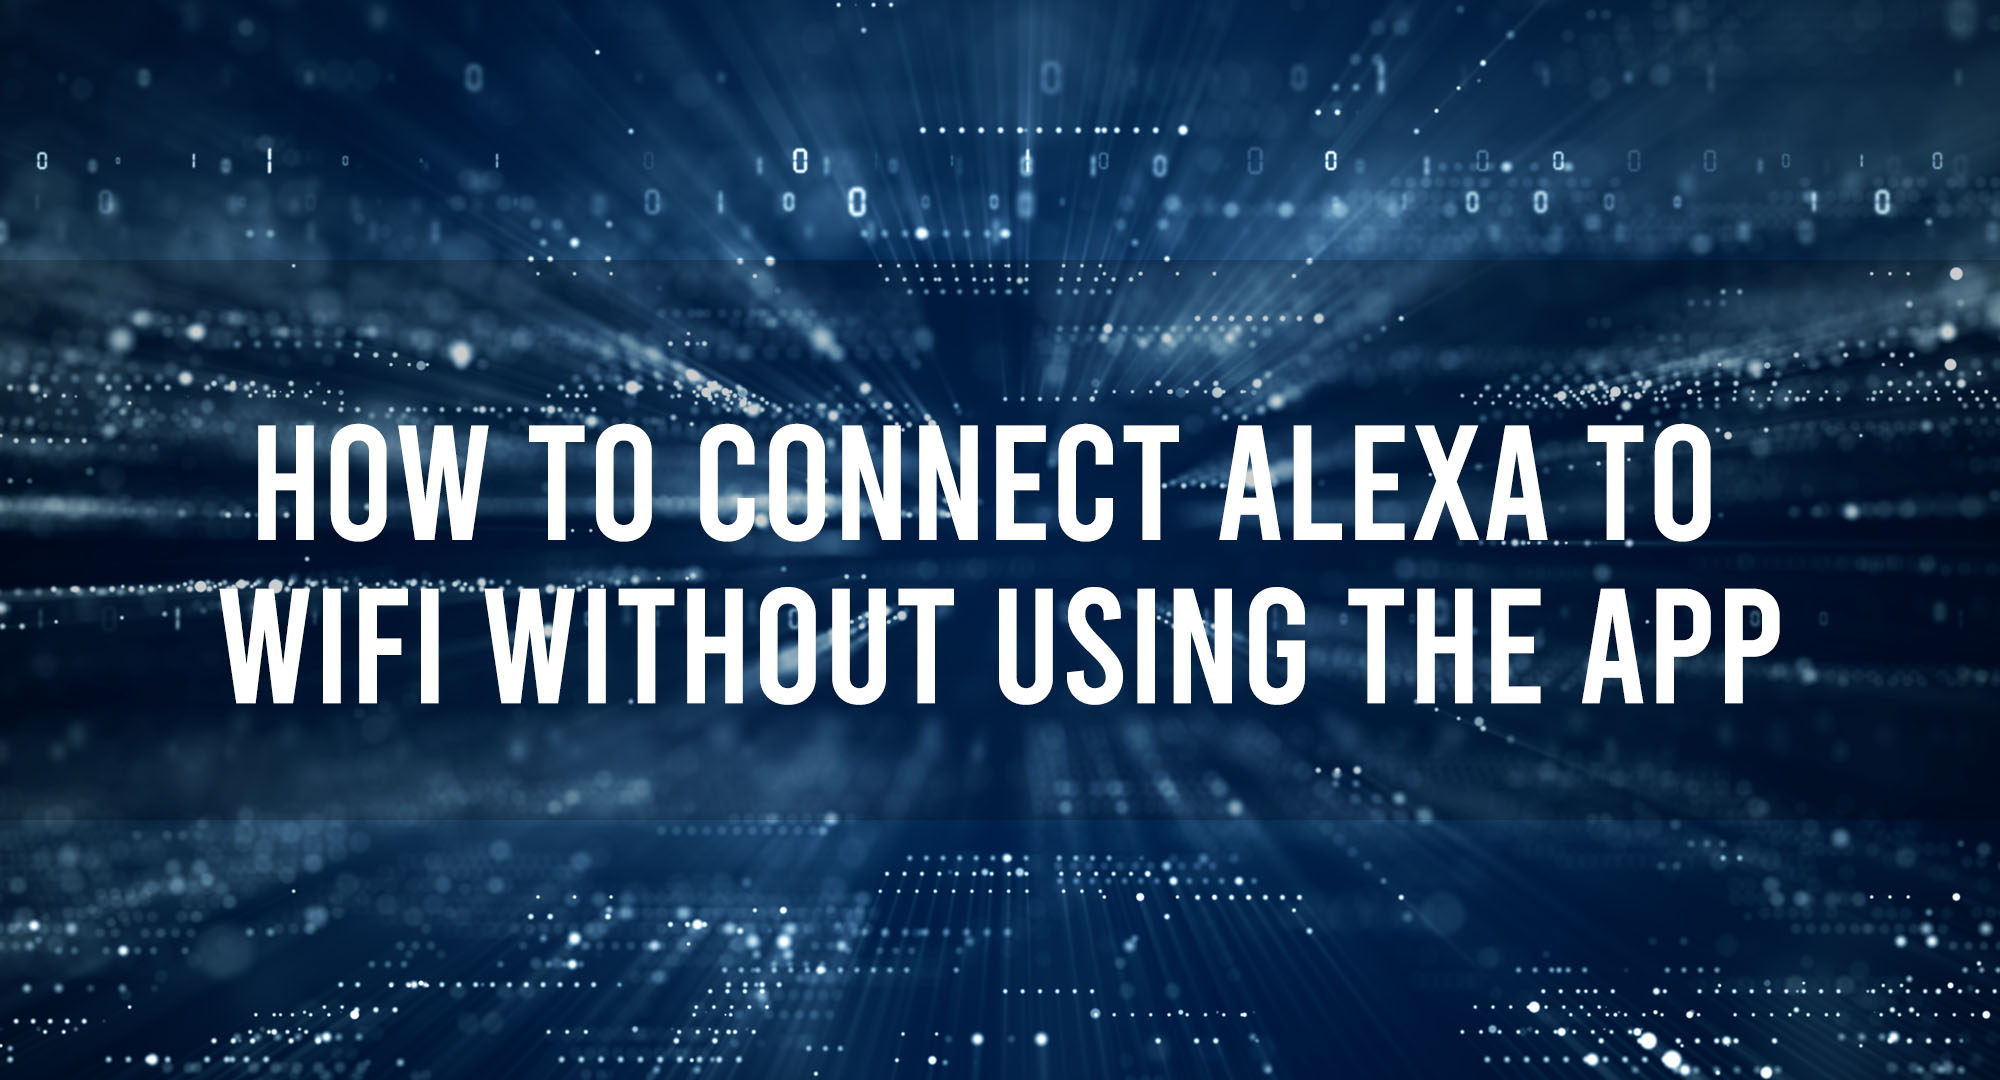 How to Connect Alexa to WiFi Without Using the App